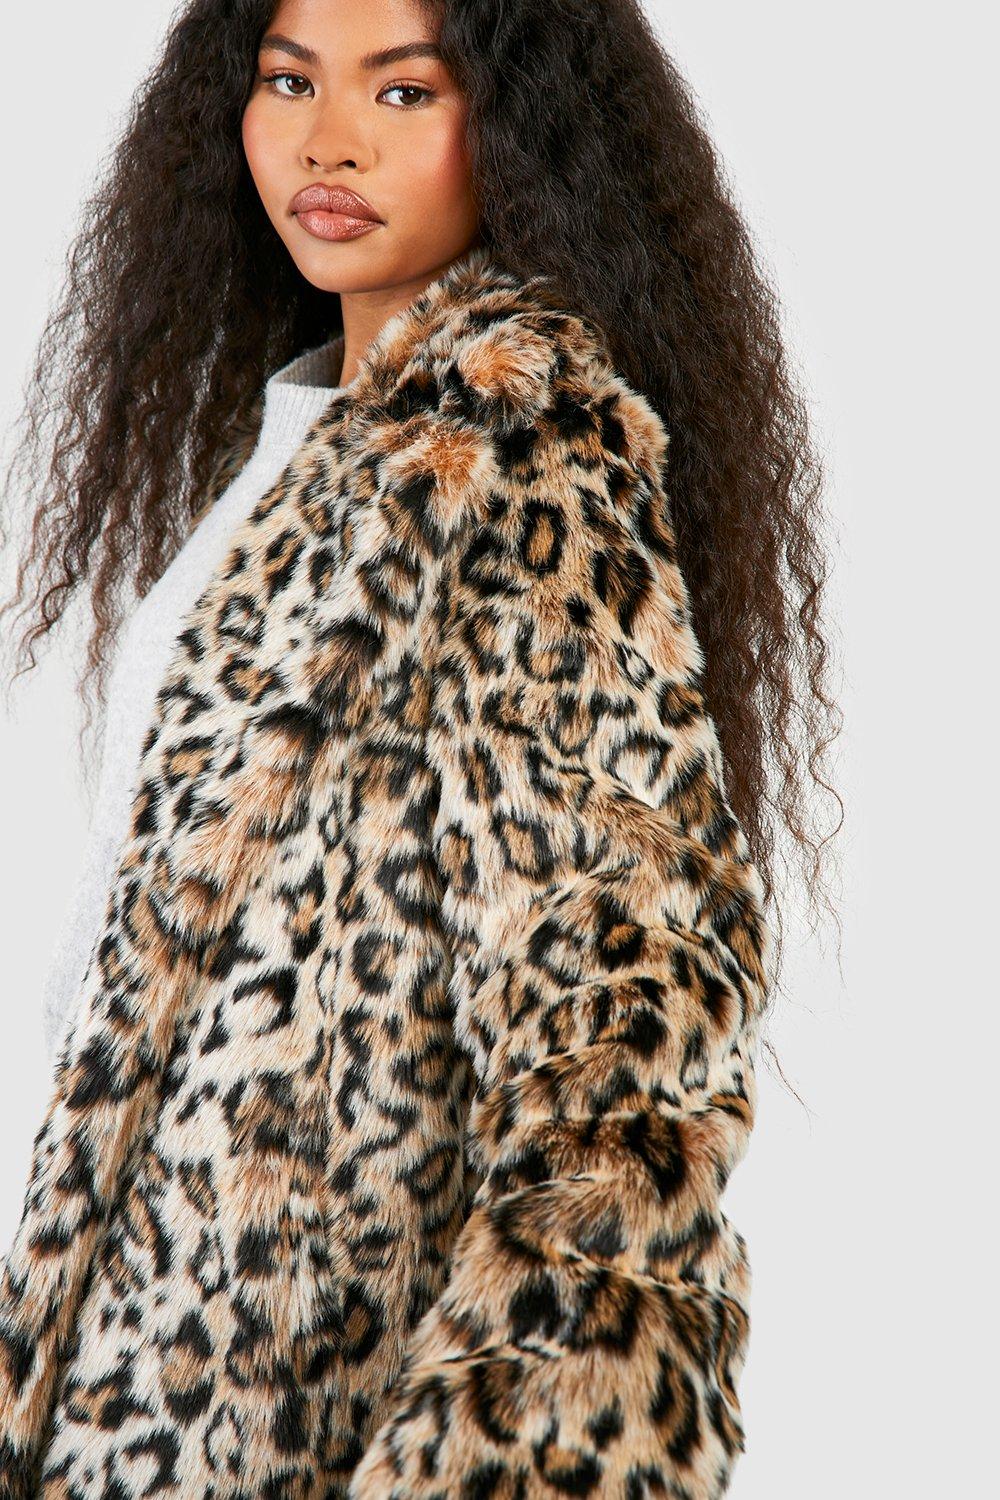 Monki Faux Fur Leopard Print Jacket In Black And White, 52% OFF